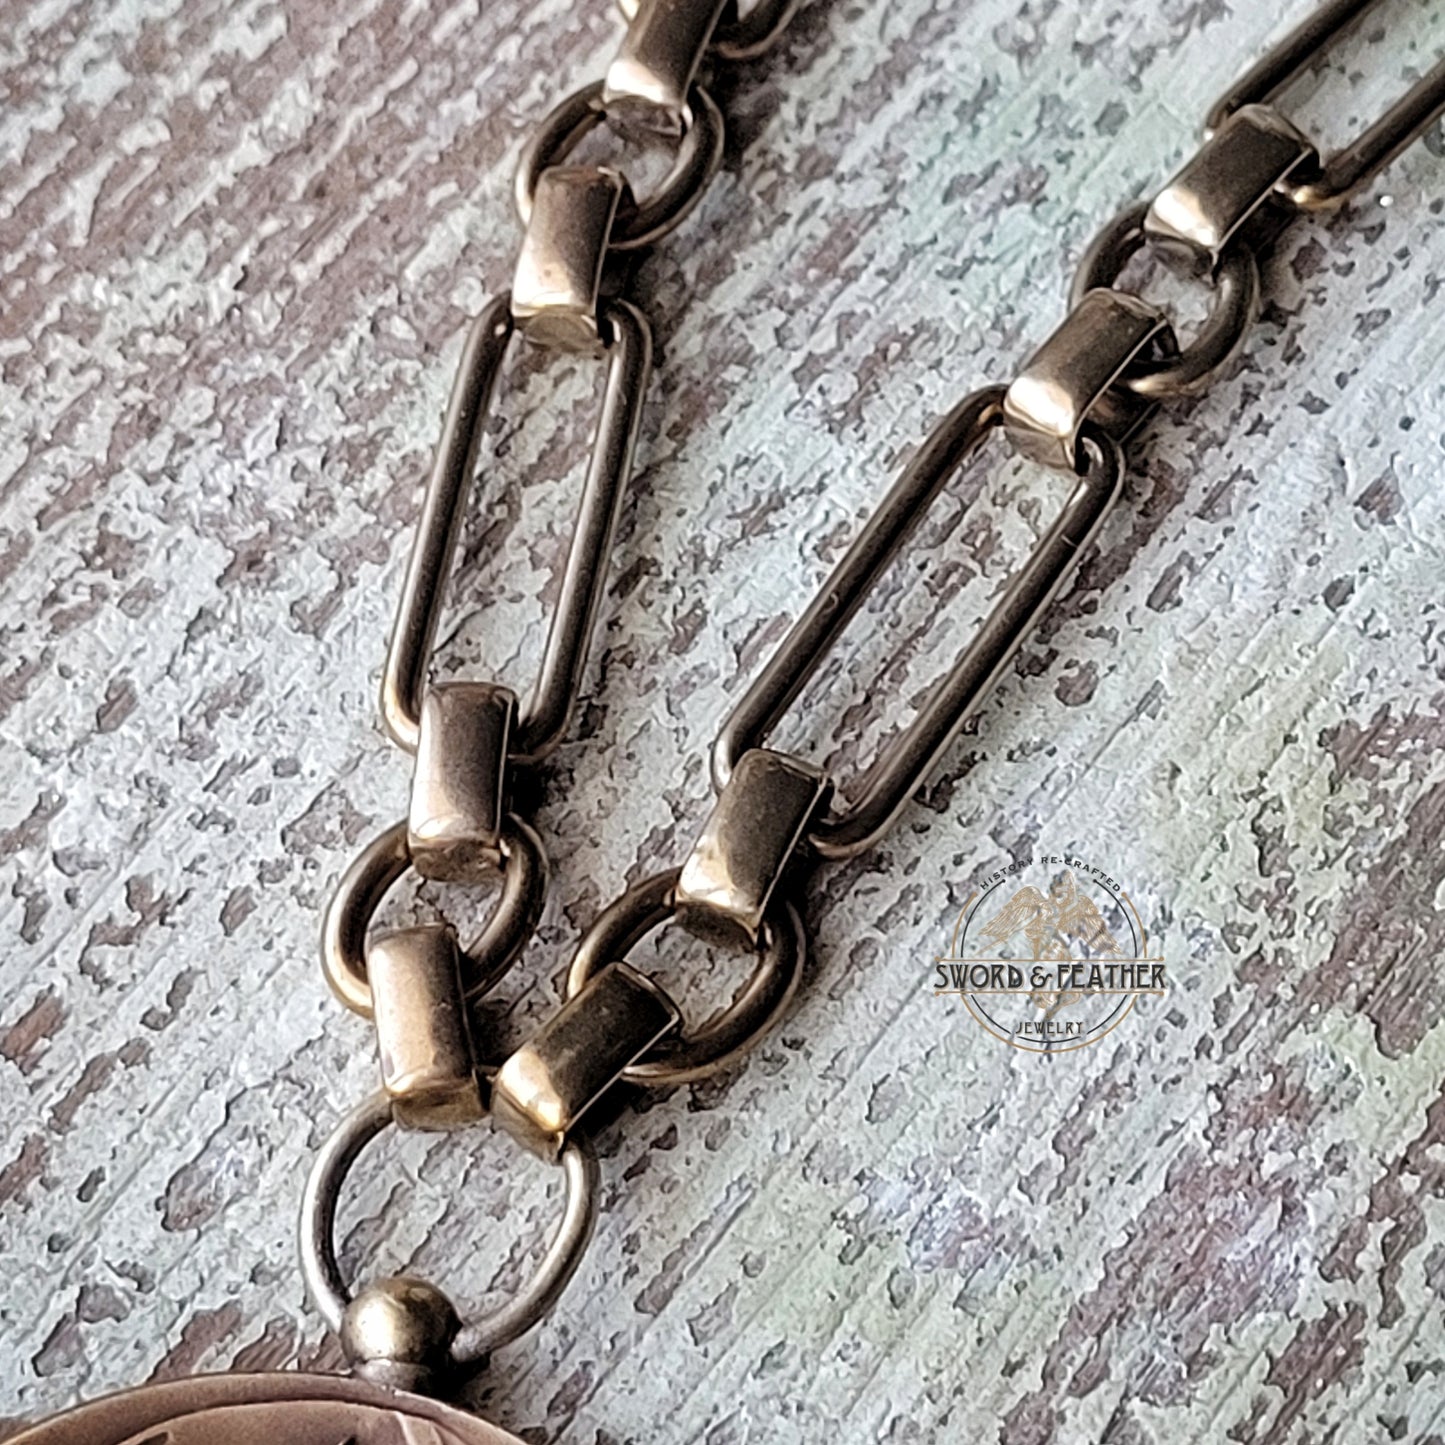 Vintage Equestrian Medallion Necklace, antique Dutch Equestrian medal, solid brass elongated station chain, fancy swivel lobster clasp, bohemian chic necklace